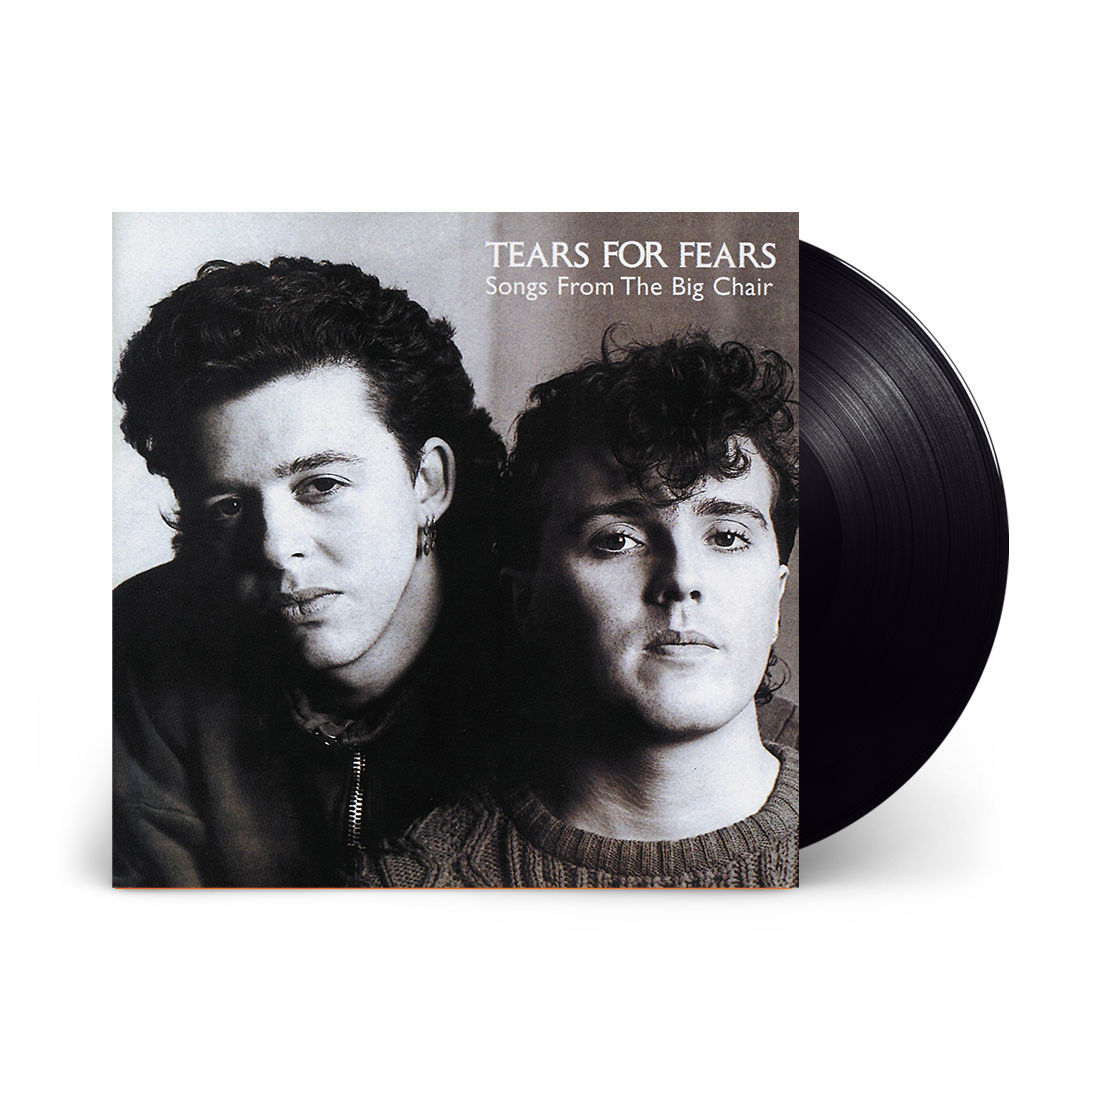 Tears For Fears - Songs from The Big Chair: Vinyl LP 